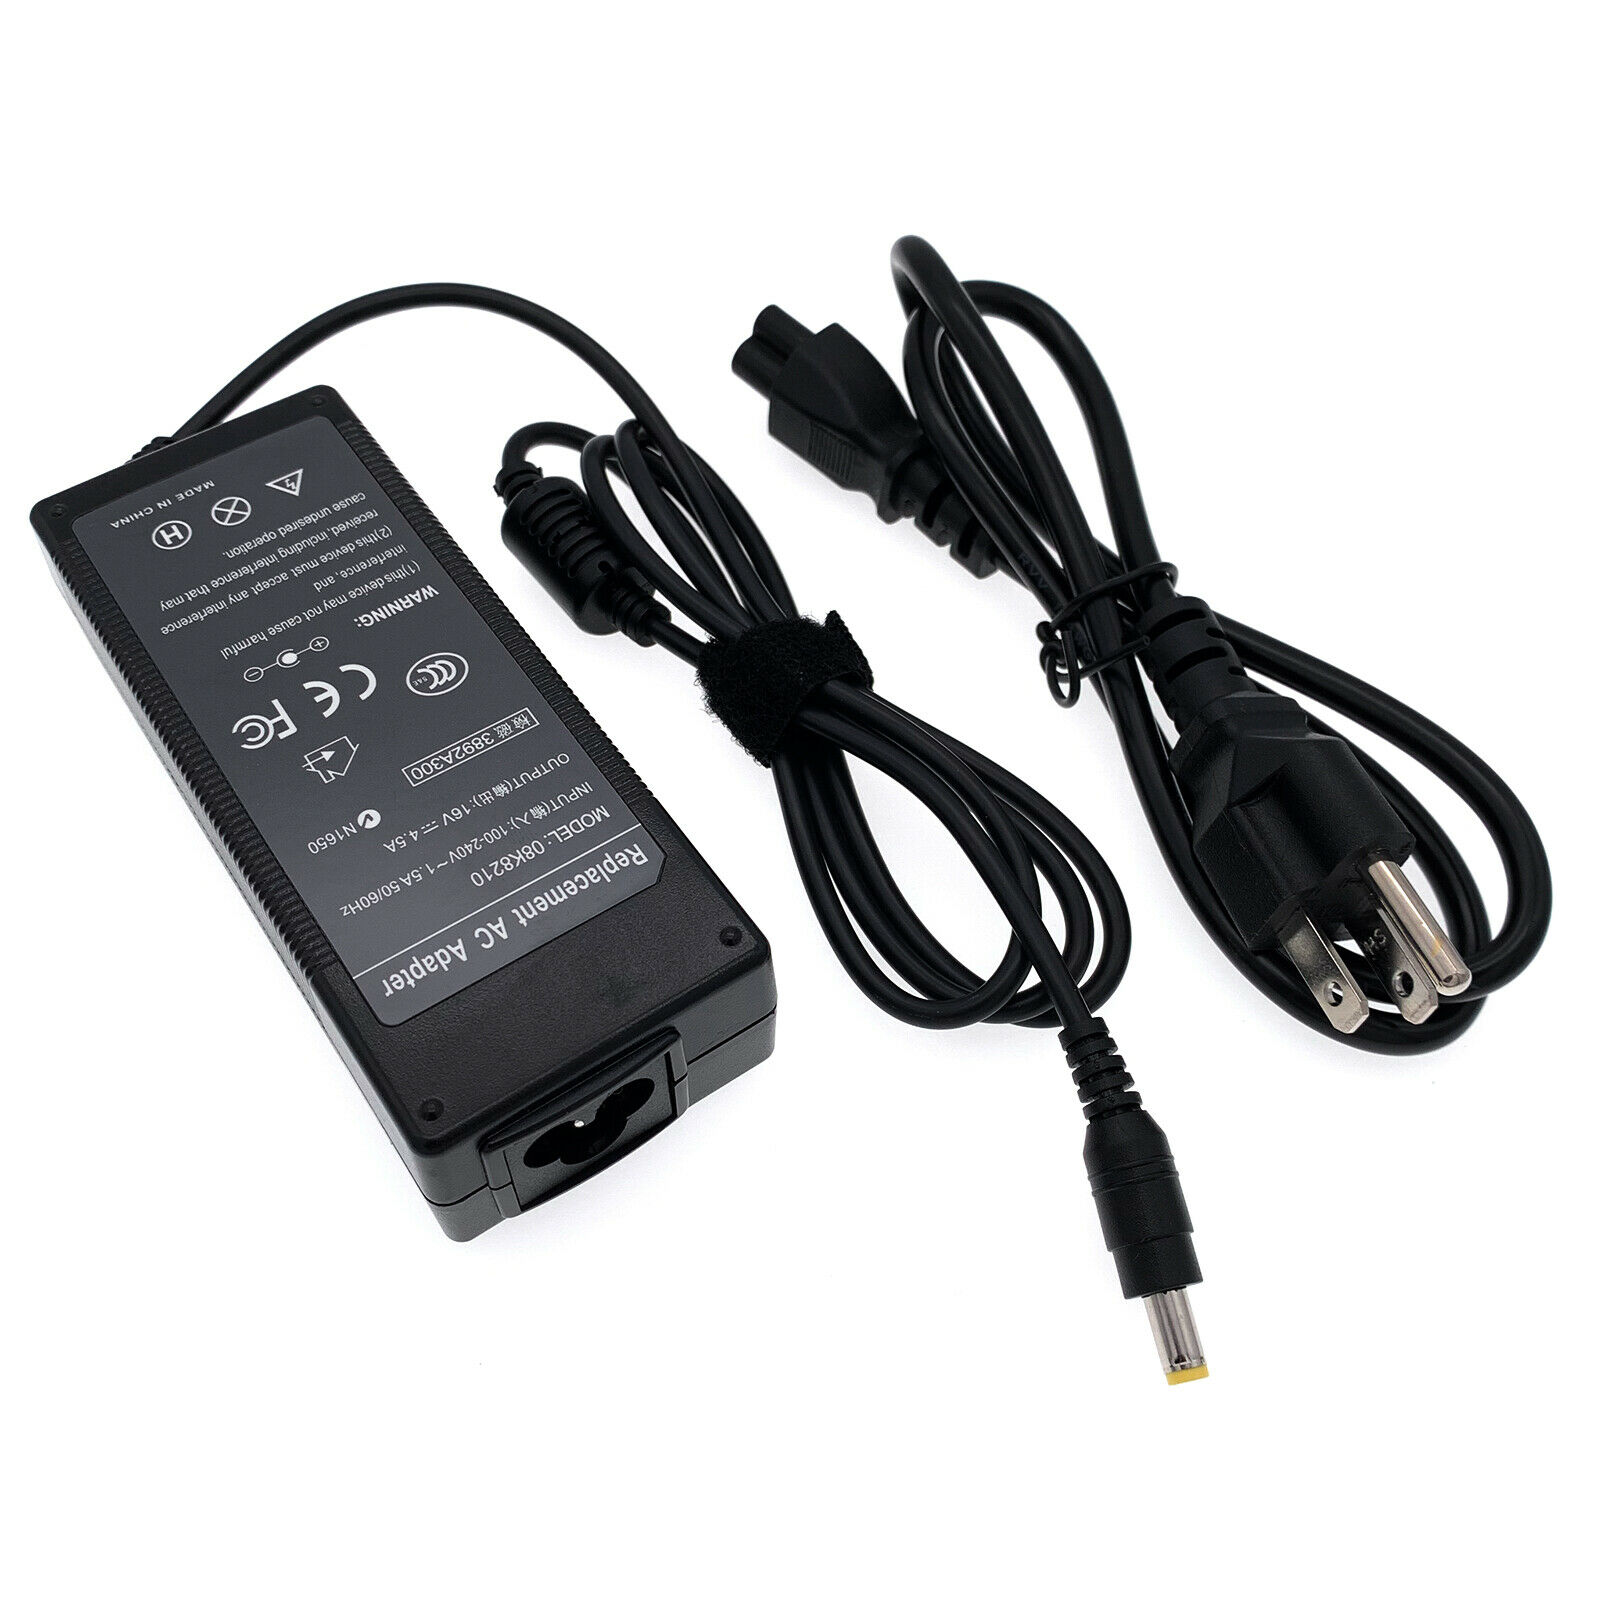 AC Adapter Charger For Panasonic Toughbook CF-19 CF-31 CF-52 CF-53 Power & Cord - image 3 of 6